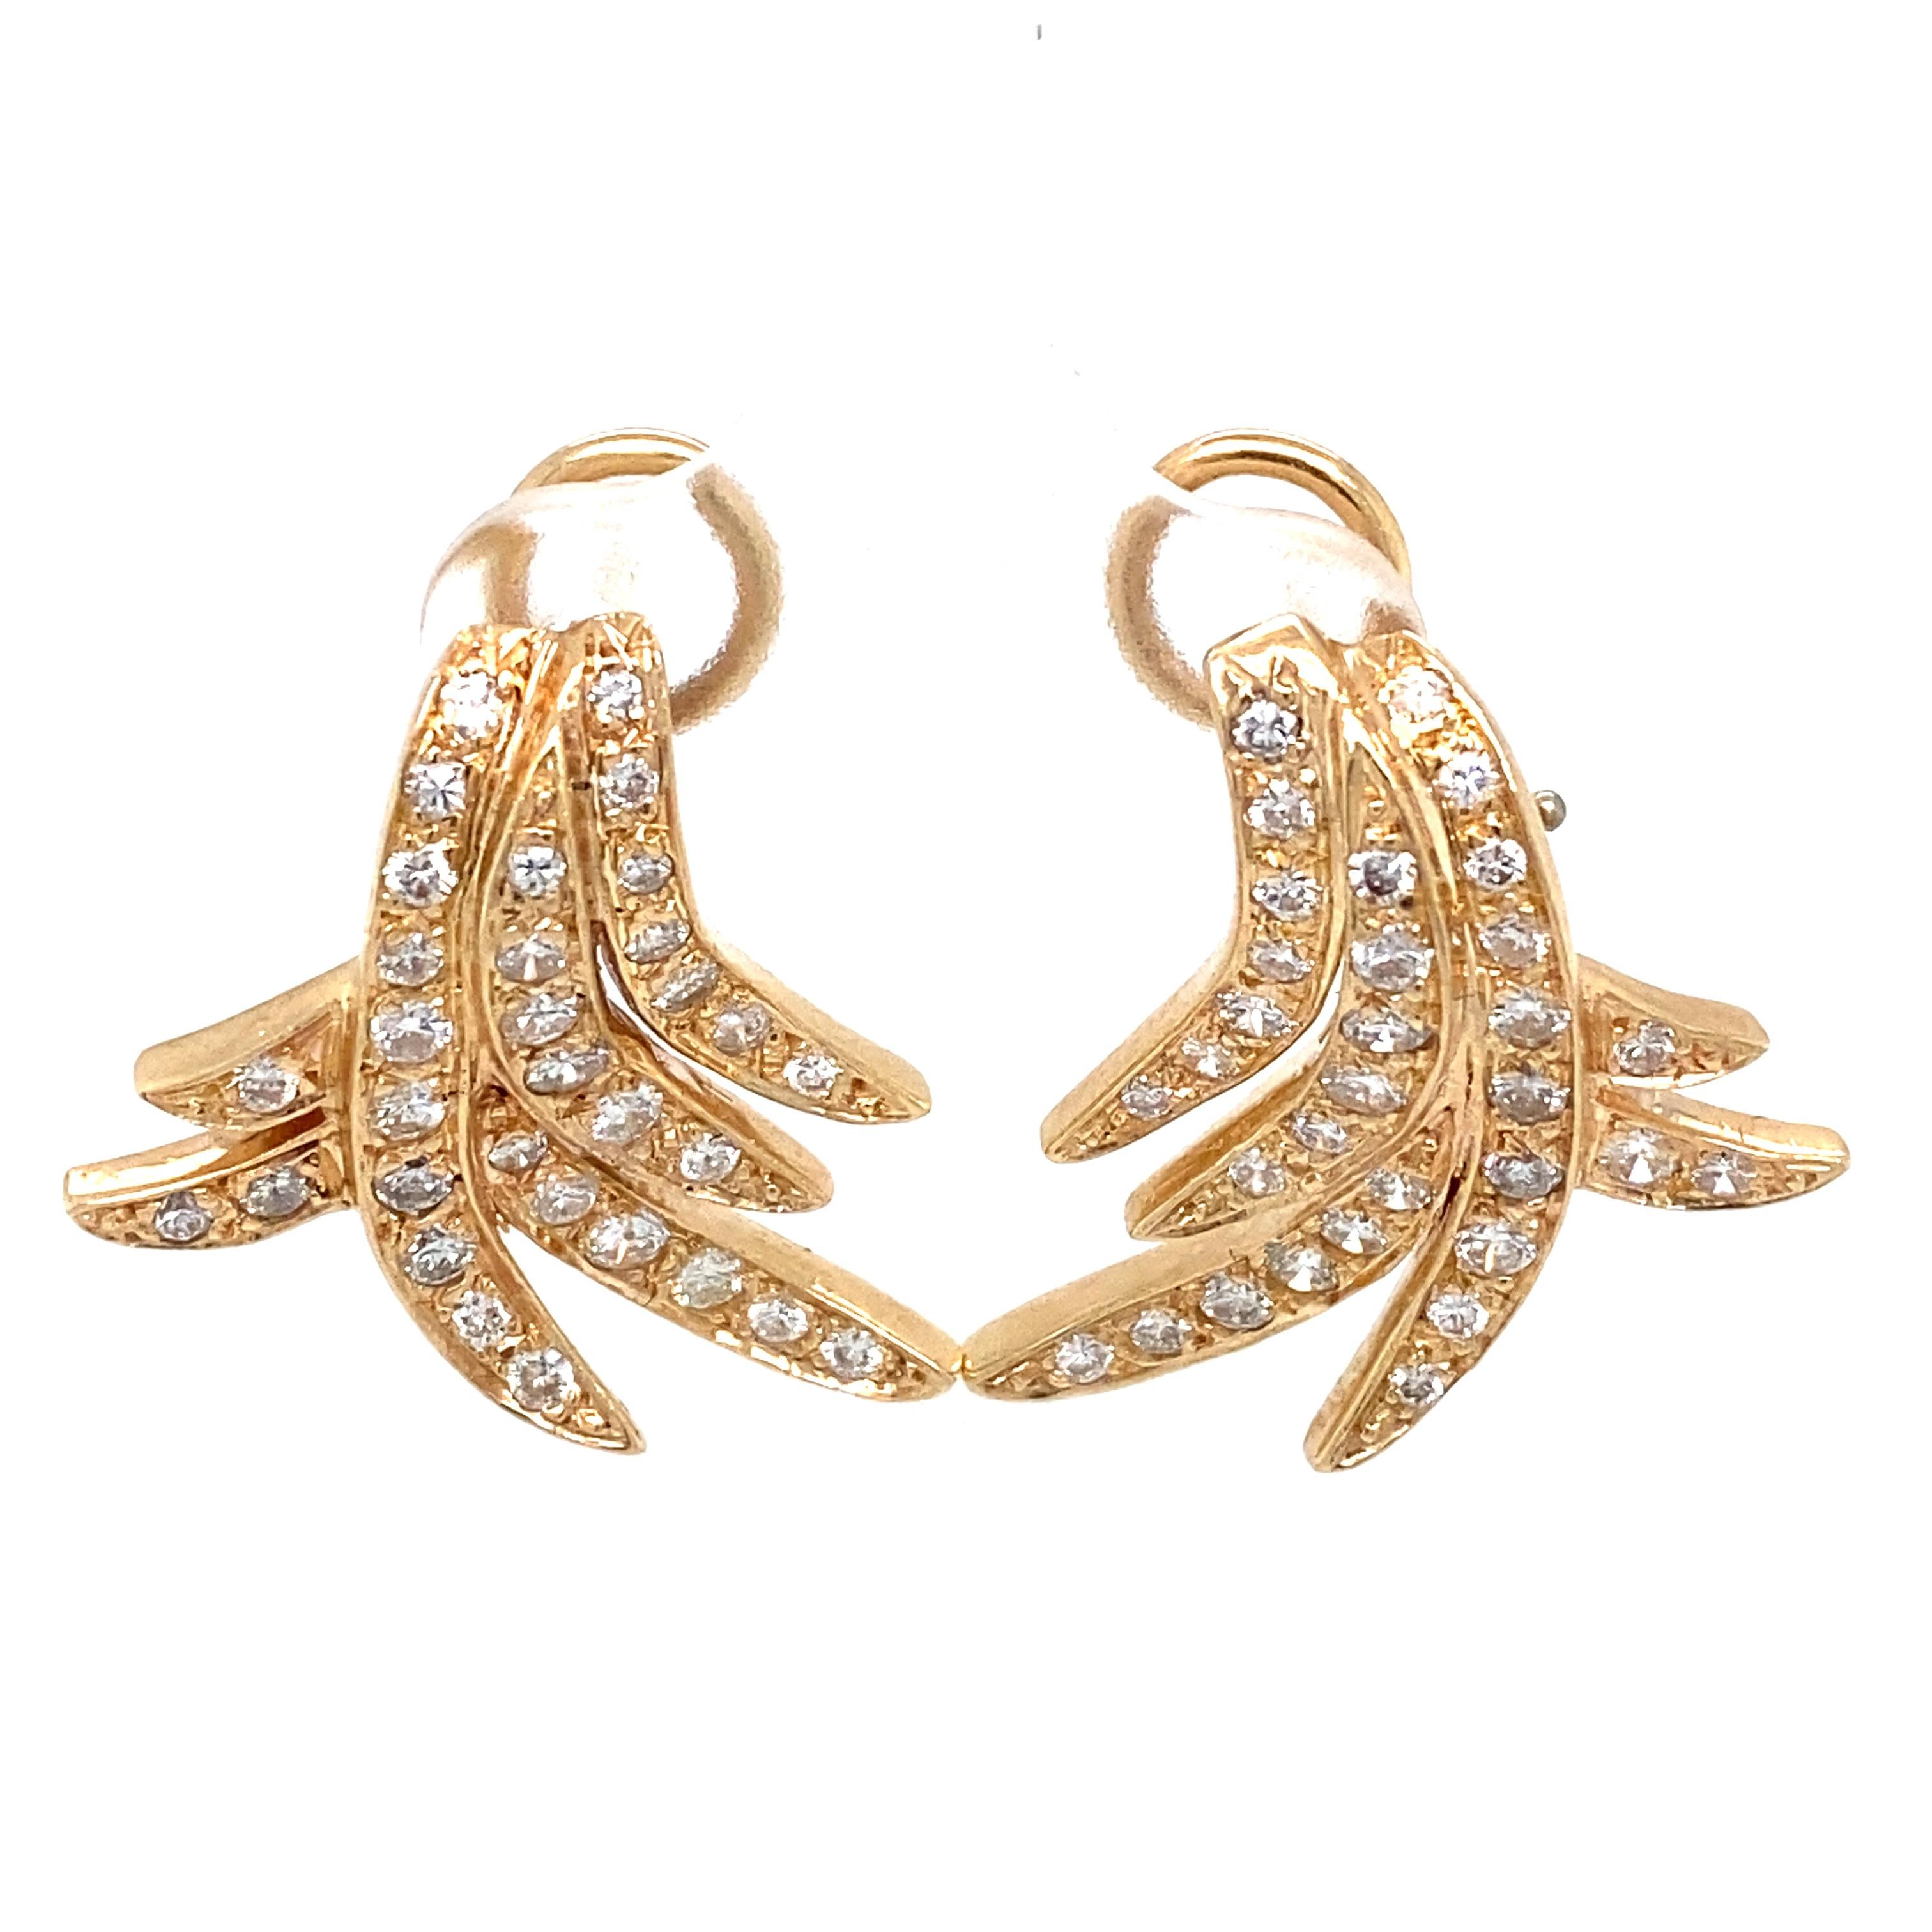 Item Details: These unique earrings are by artist Enrique Pascual and are signed. They have a feather design with round diamonds, and the backs are omega clips. 

Circa: 2000s
Metal Type: 14 Karat Gold
Weight: 10.4 grams
Size: 1 inch Length